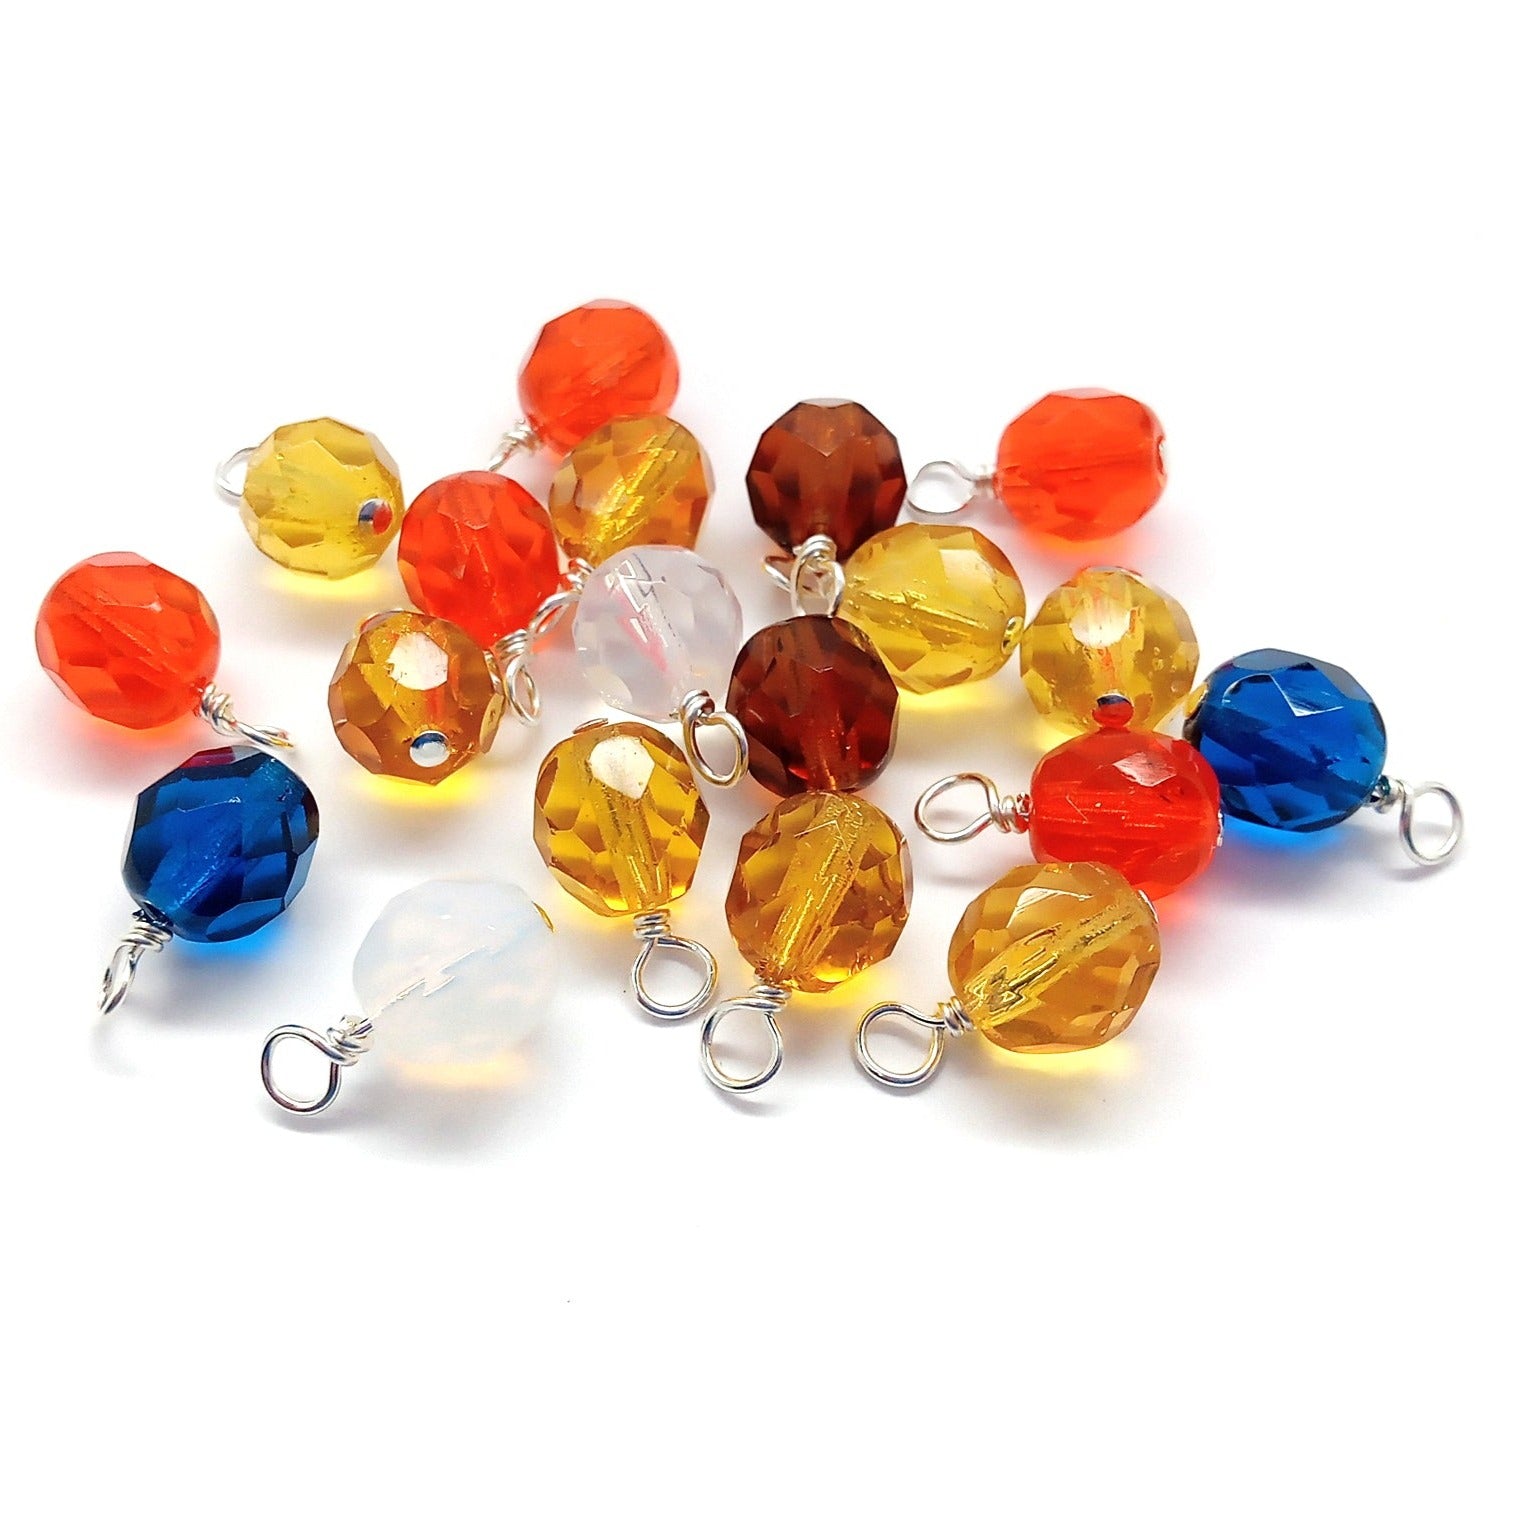 10 pc Colorful Dangles, 8mm Fire-Polished Bead Charms, Ocean Sunrise Mix